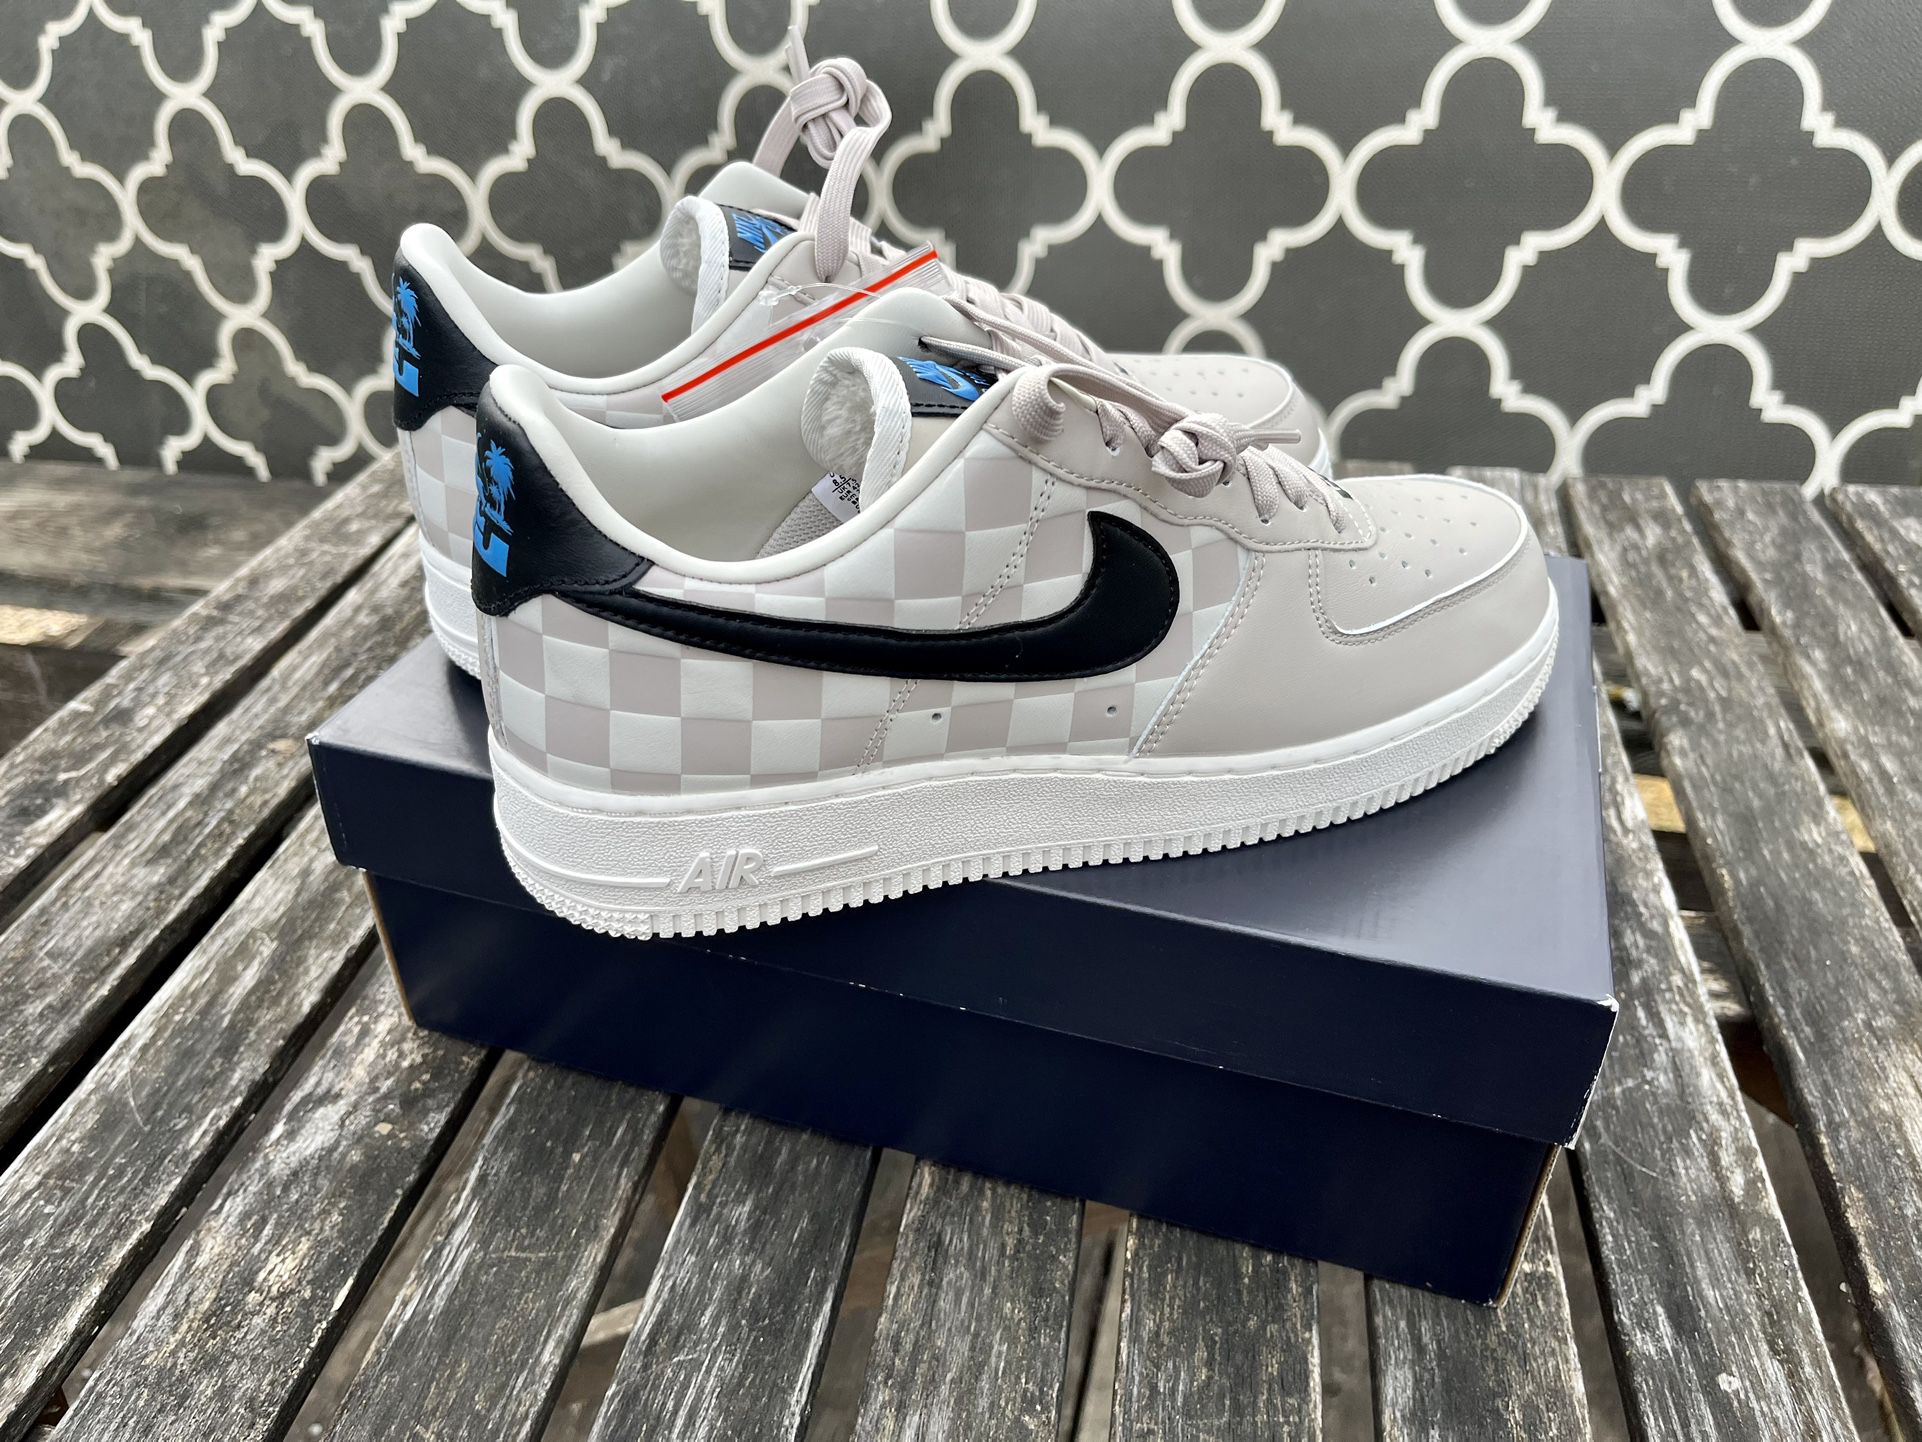 Nike x LeBron James Air Force 1 Low „Strive For Greatness“ Louis